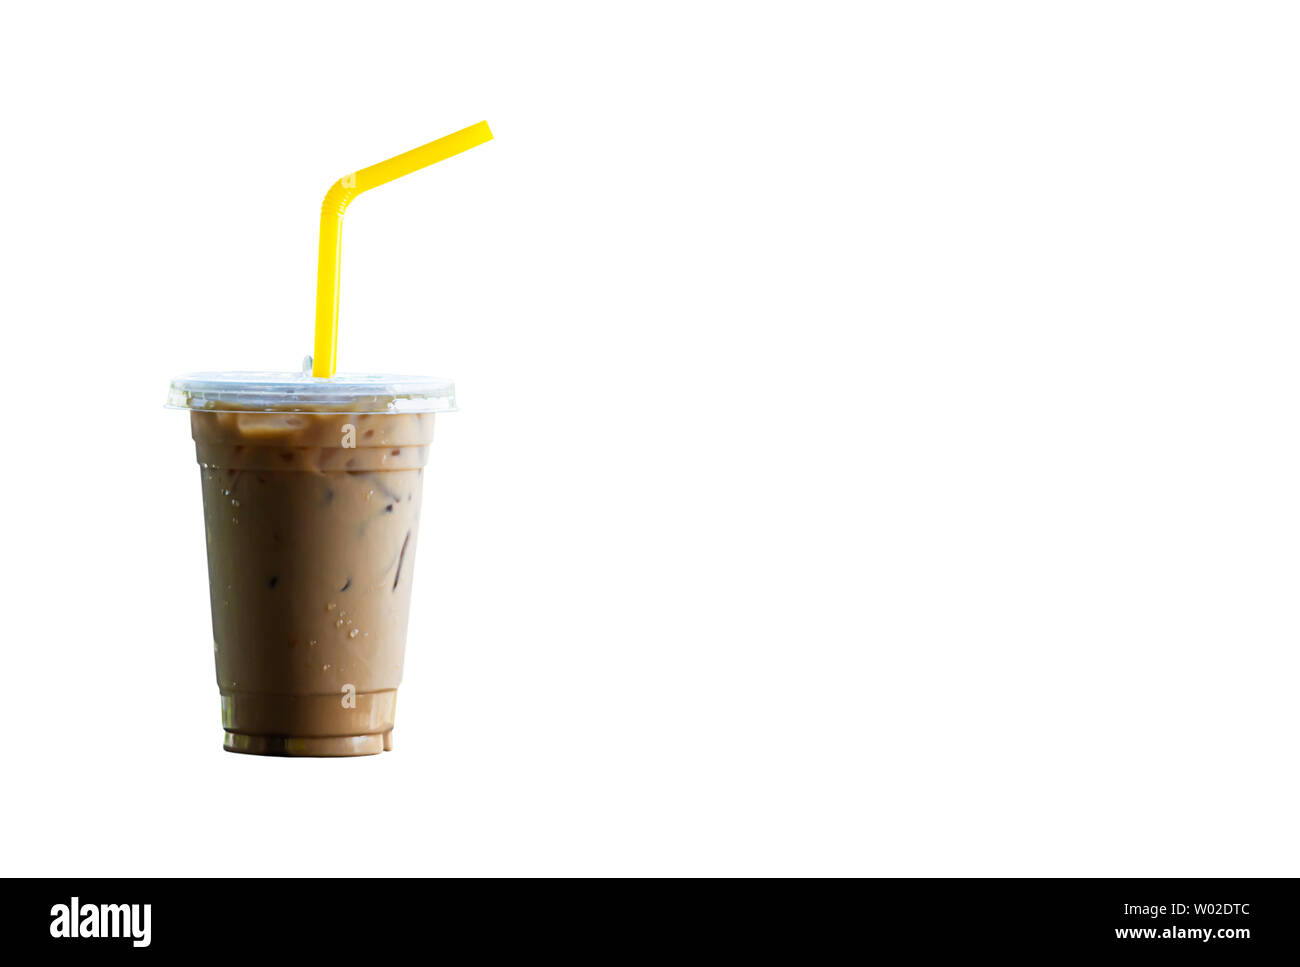 Iced coffee in a plastic glass on a white background with clipping path. Stock Photo